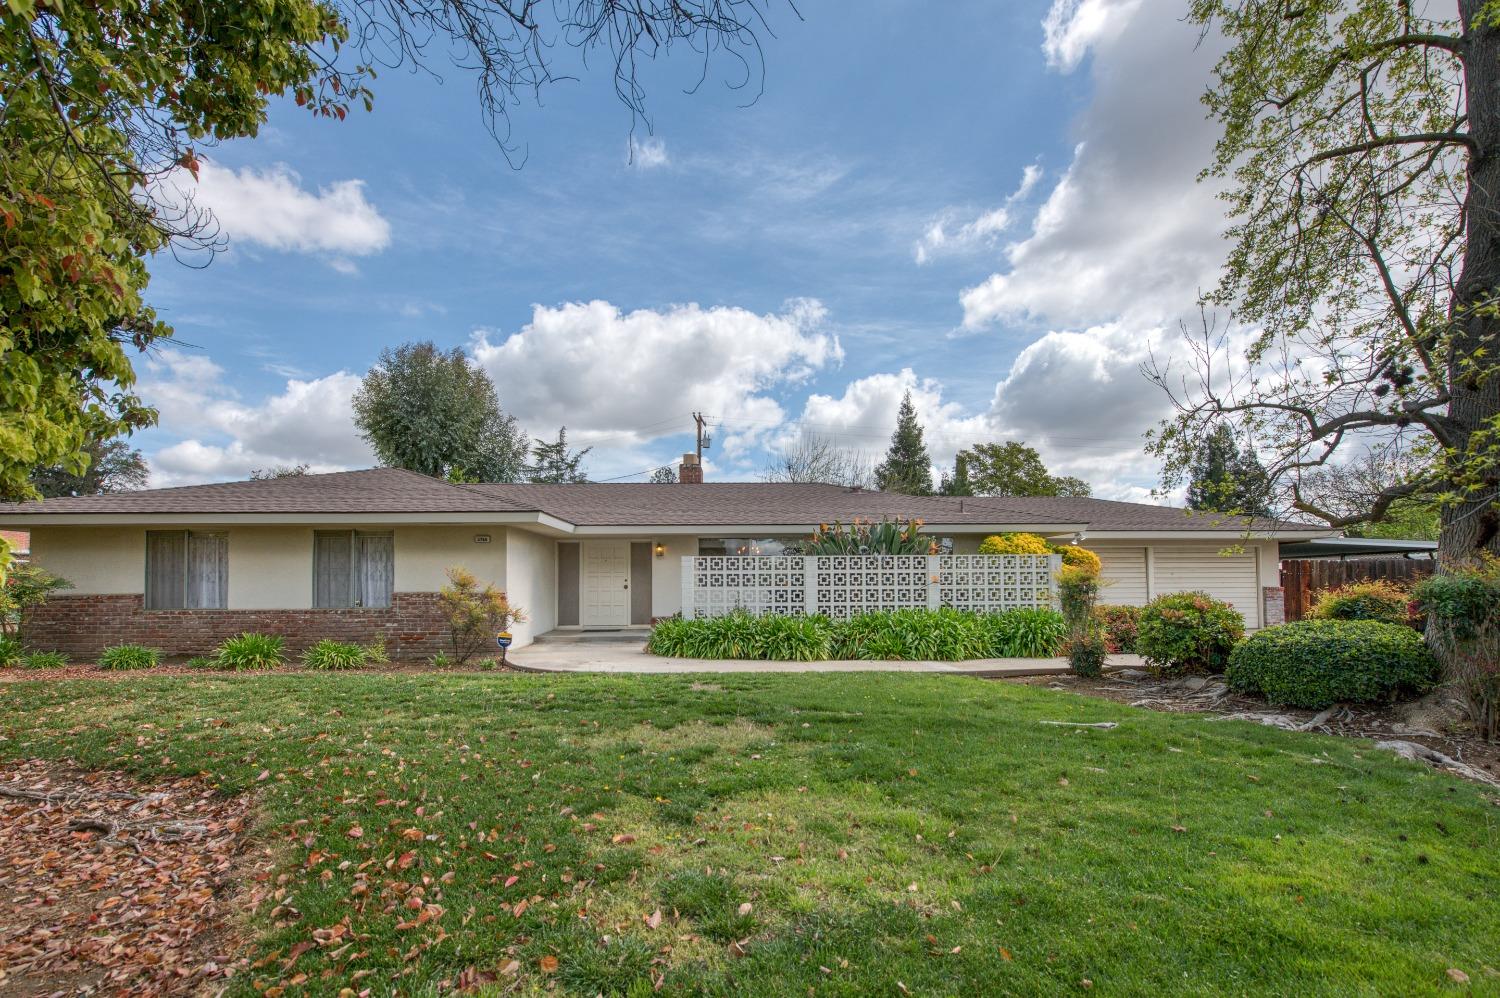 Photo of 5766 N Pleasant Ave in Fresno, CA